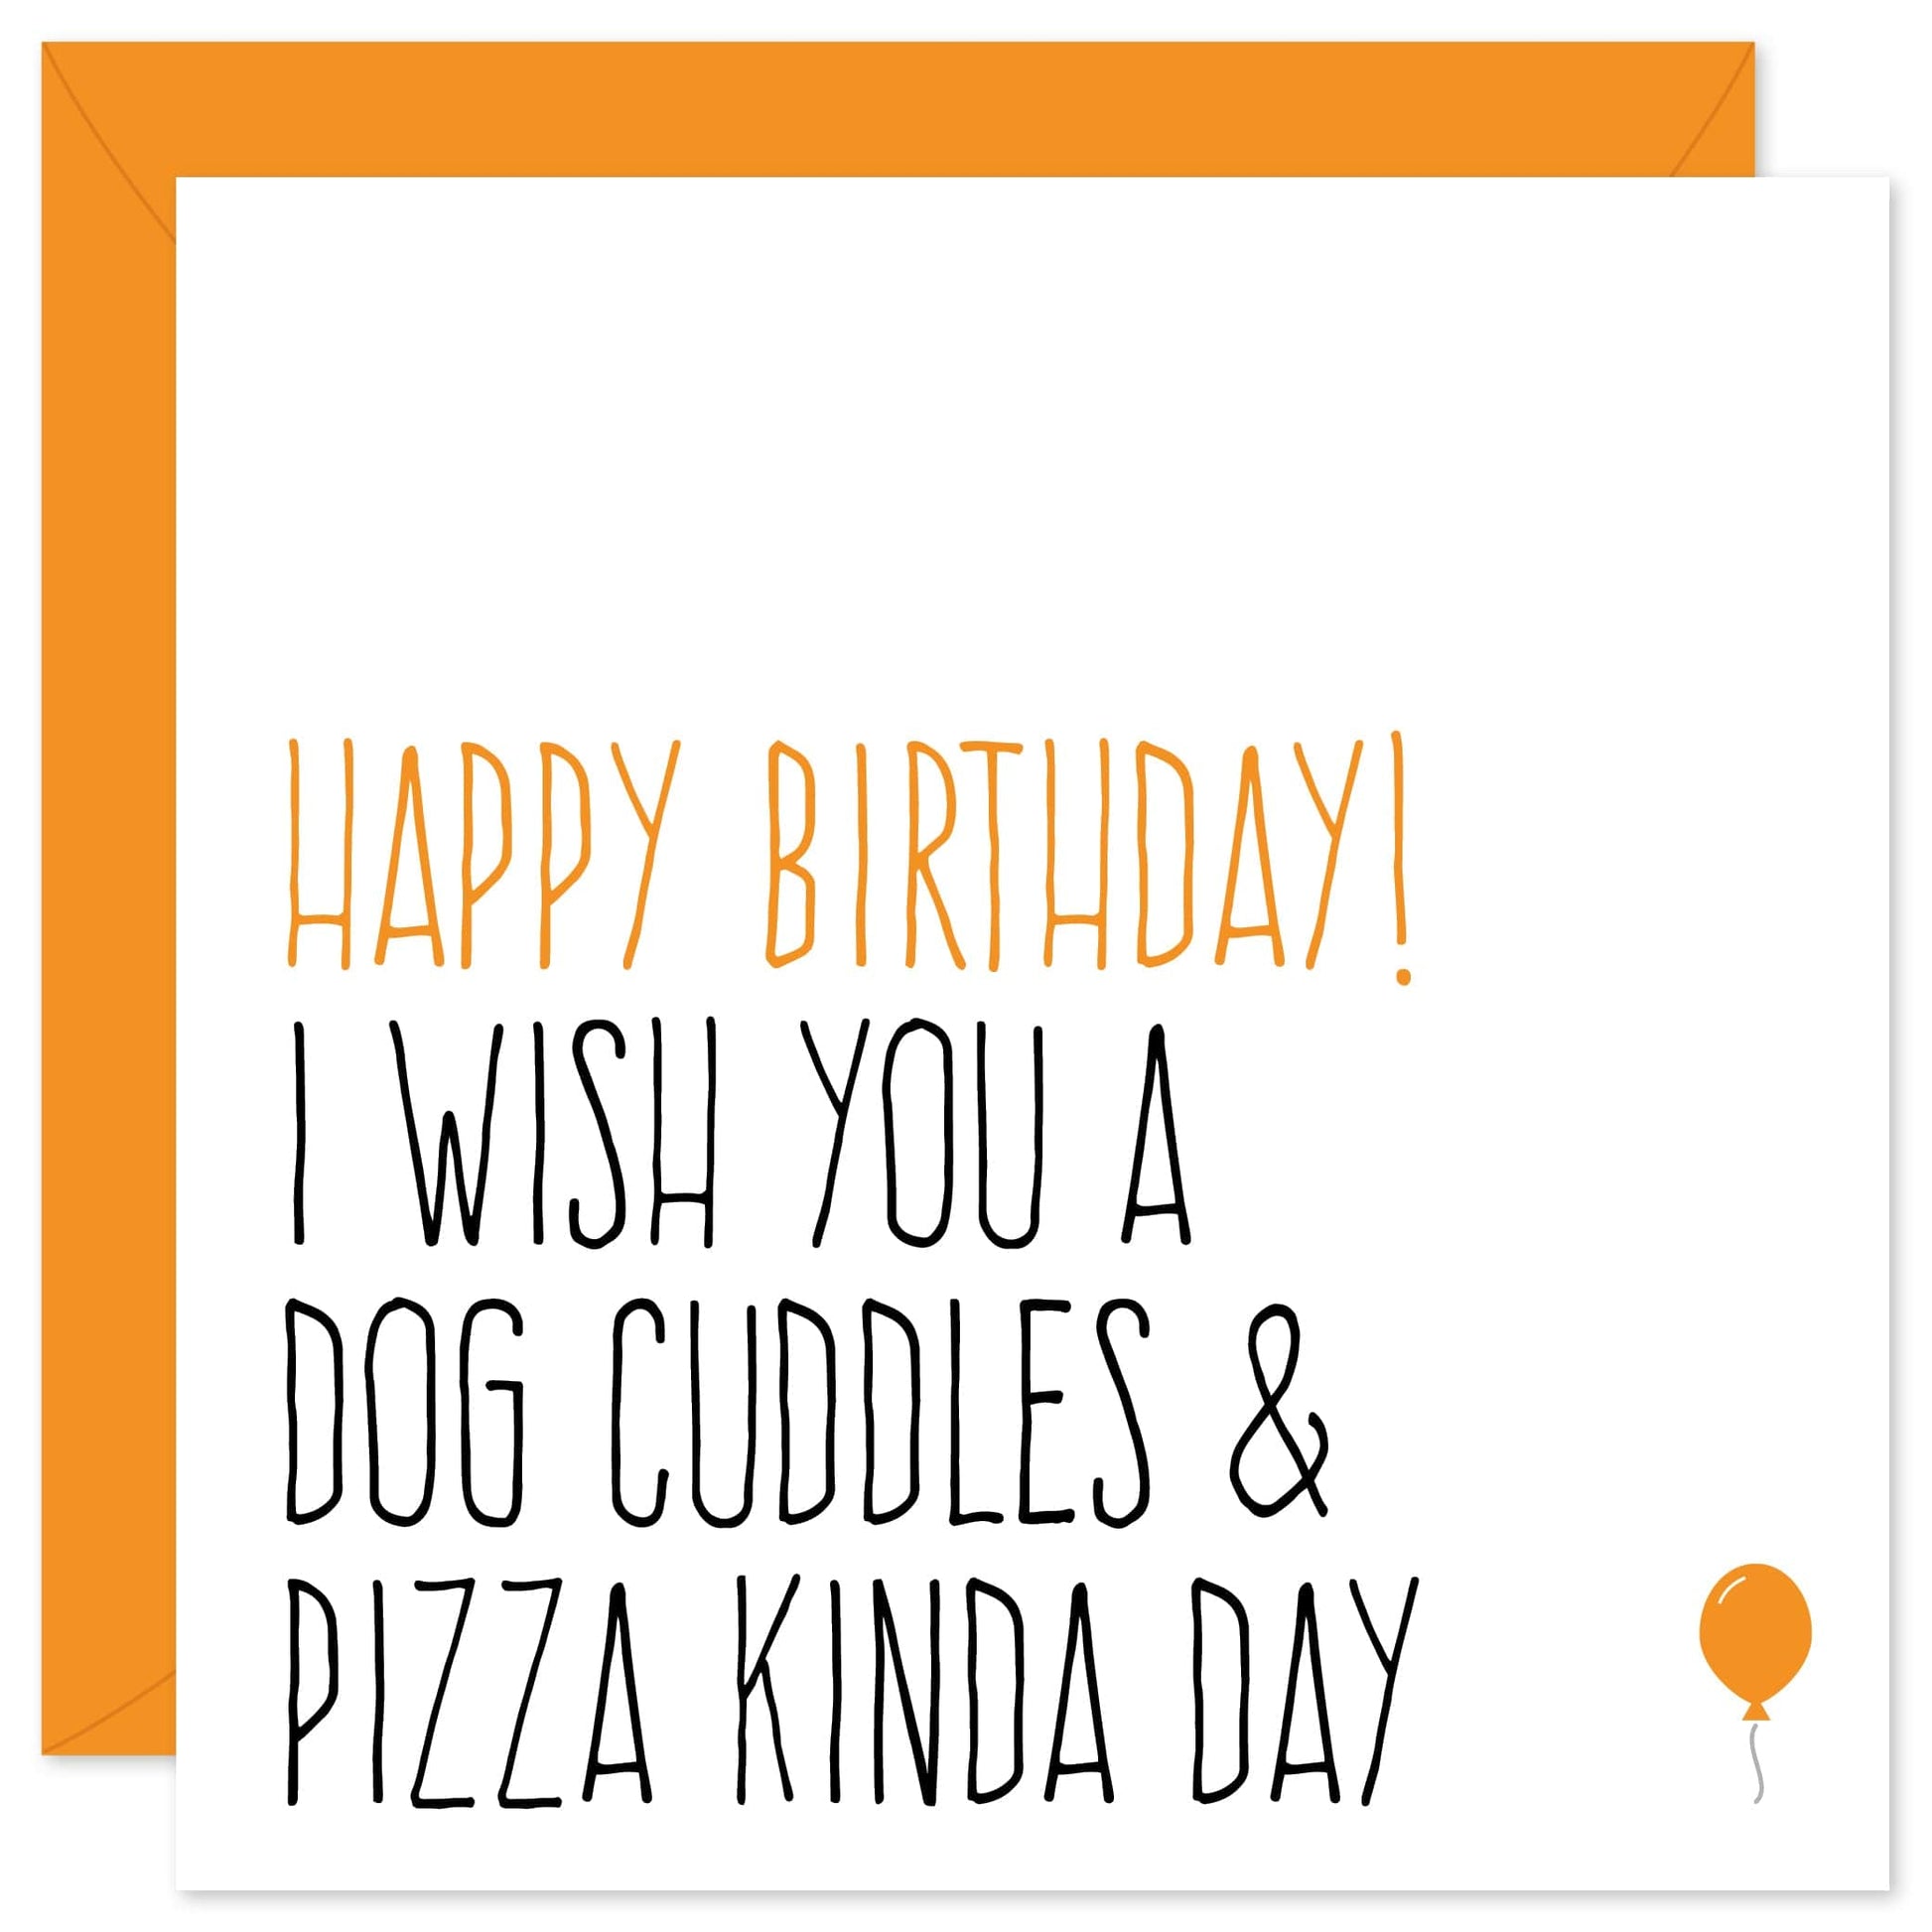 Dog cuddles and pizza birthday card from Purple Tree Designs